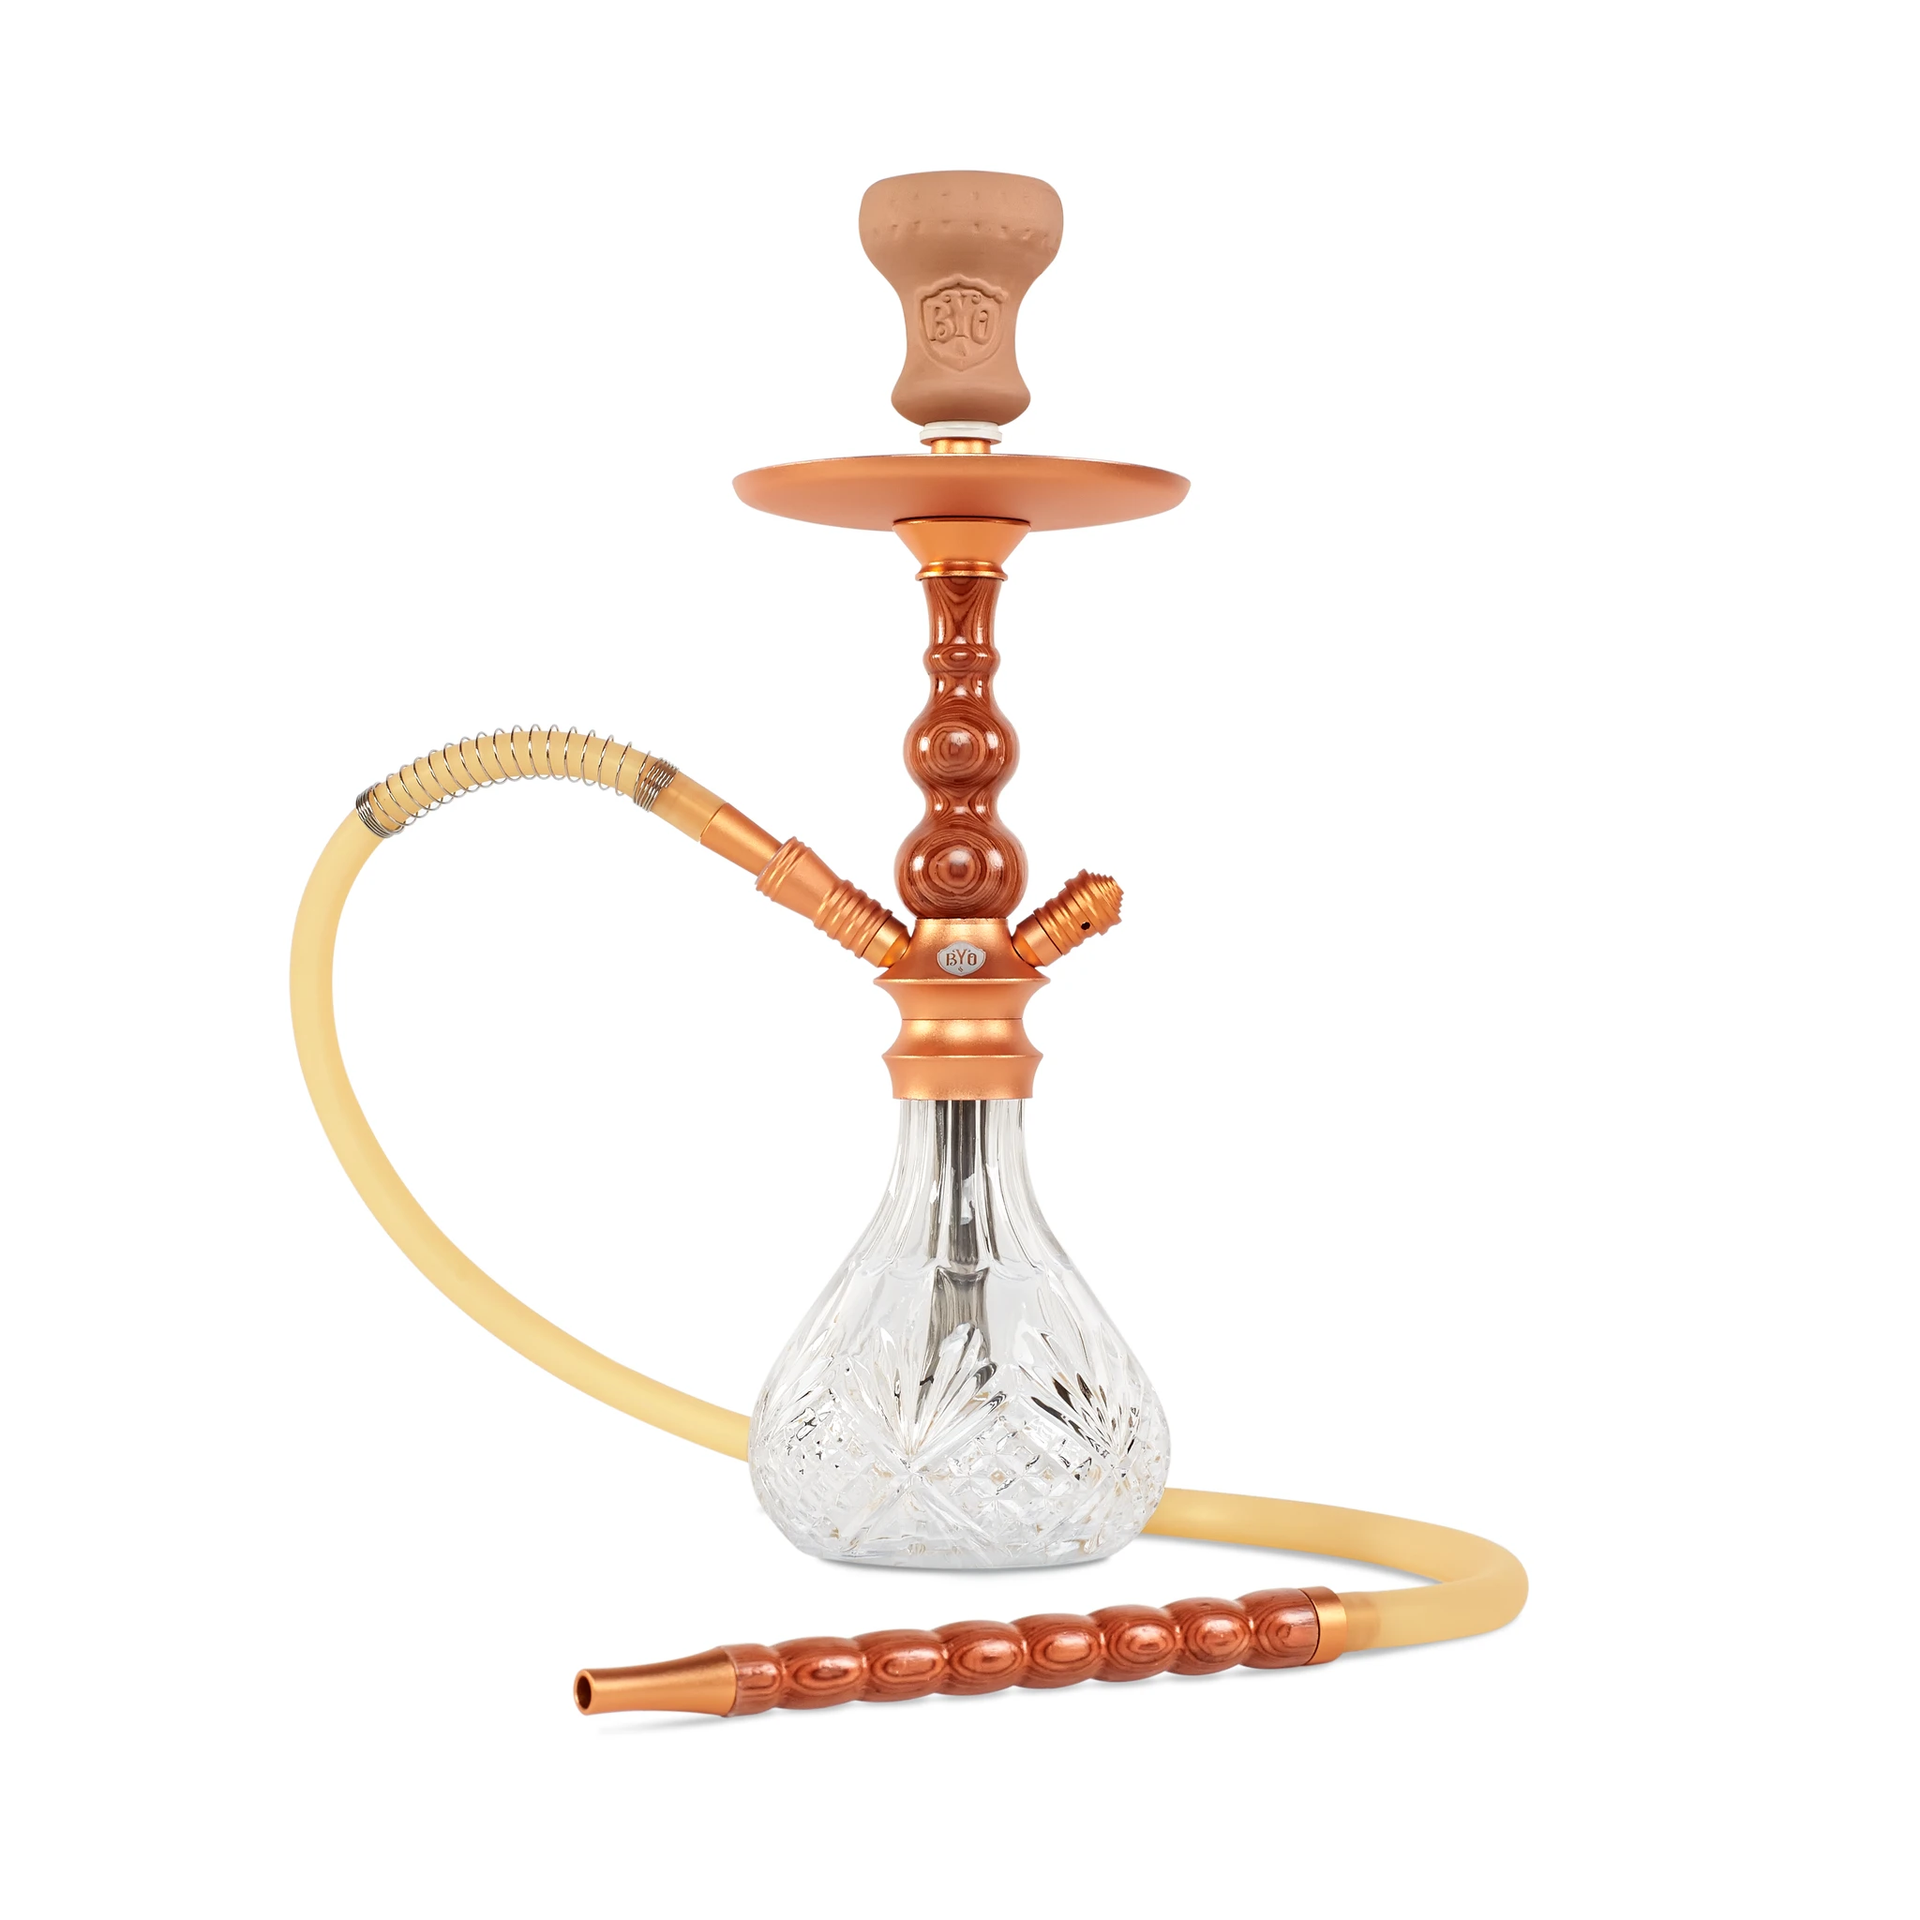 BYO Bella Hookah 18" rose gold stem with clear base matching wood handle hose